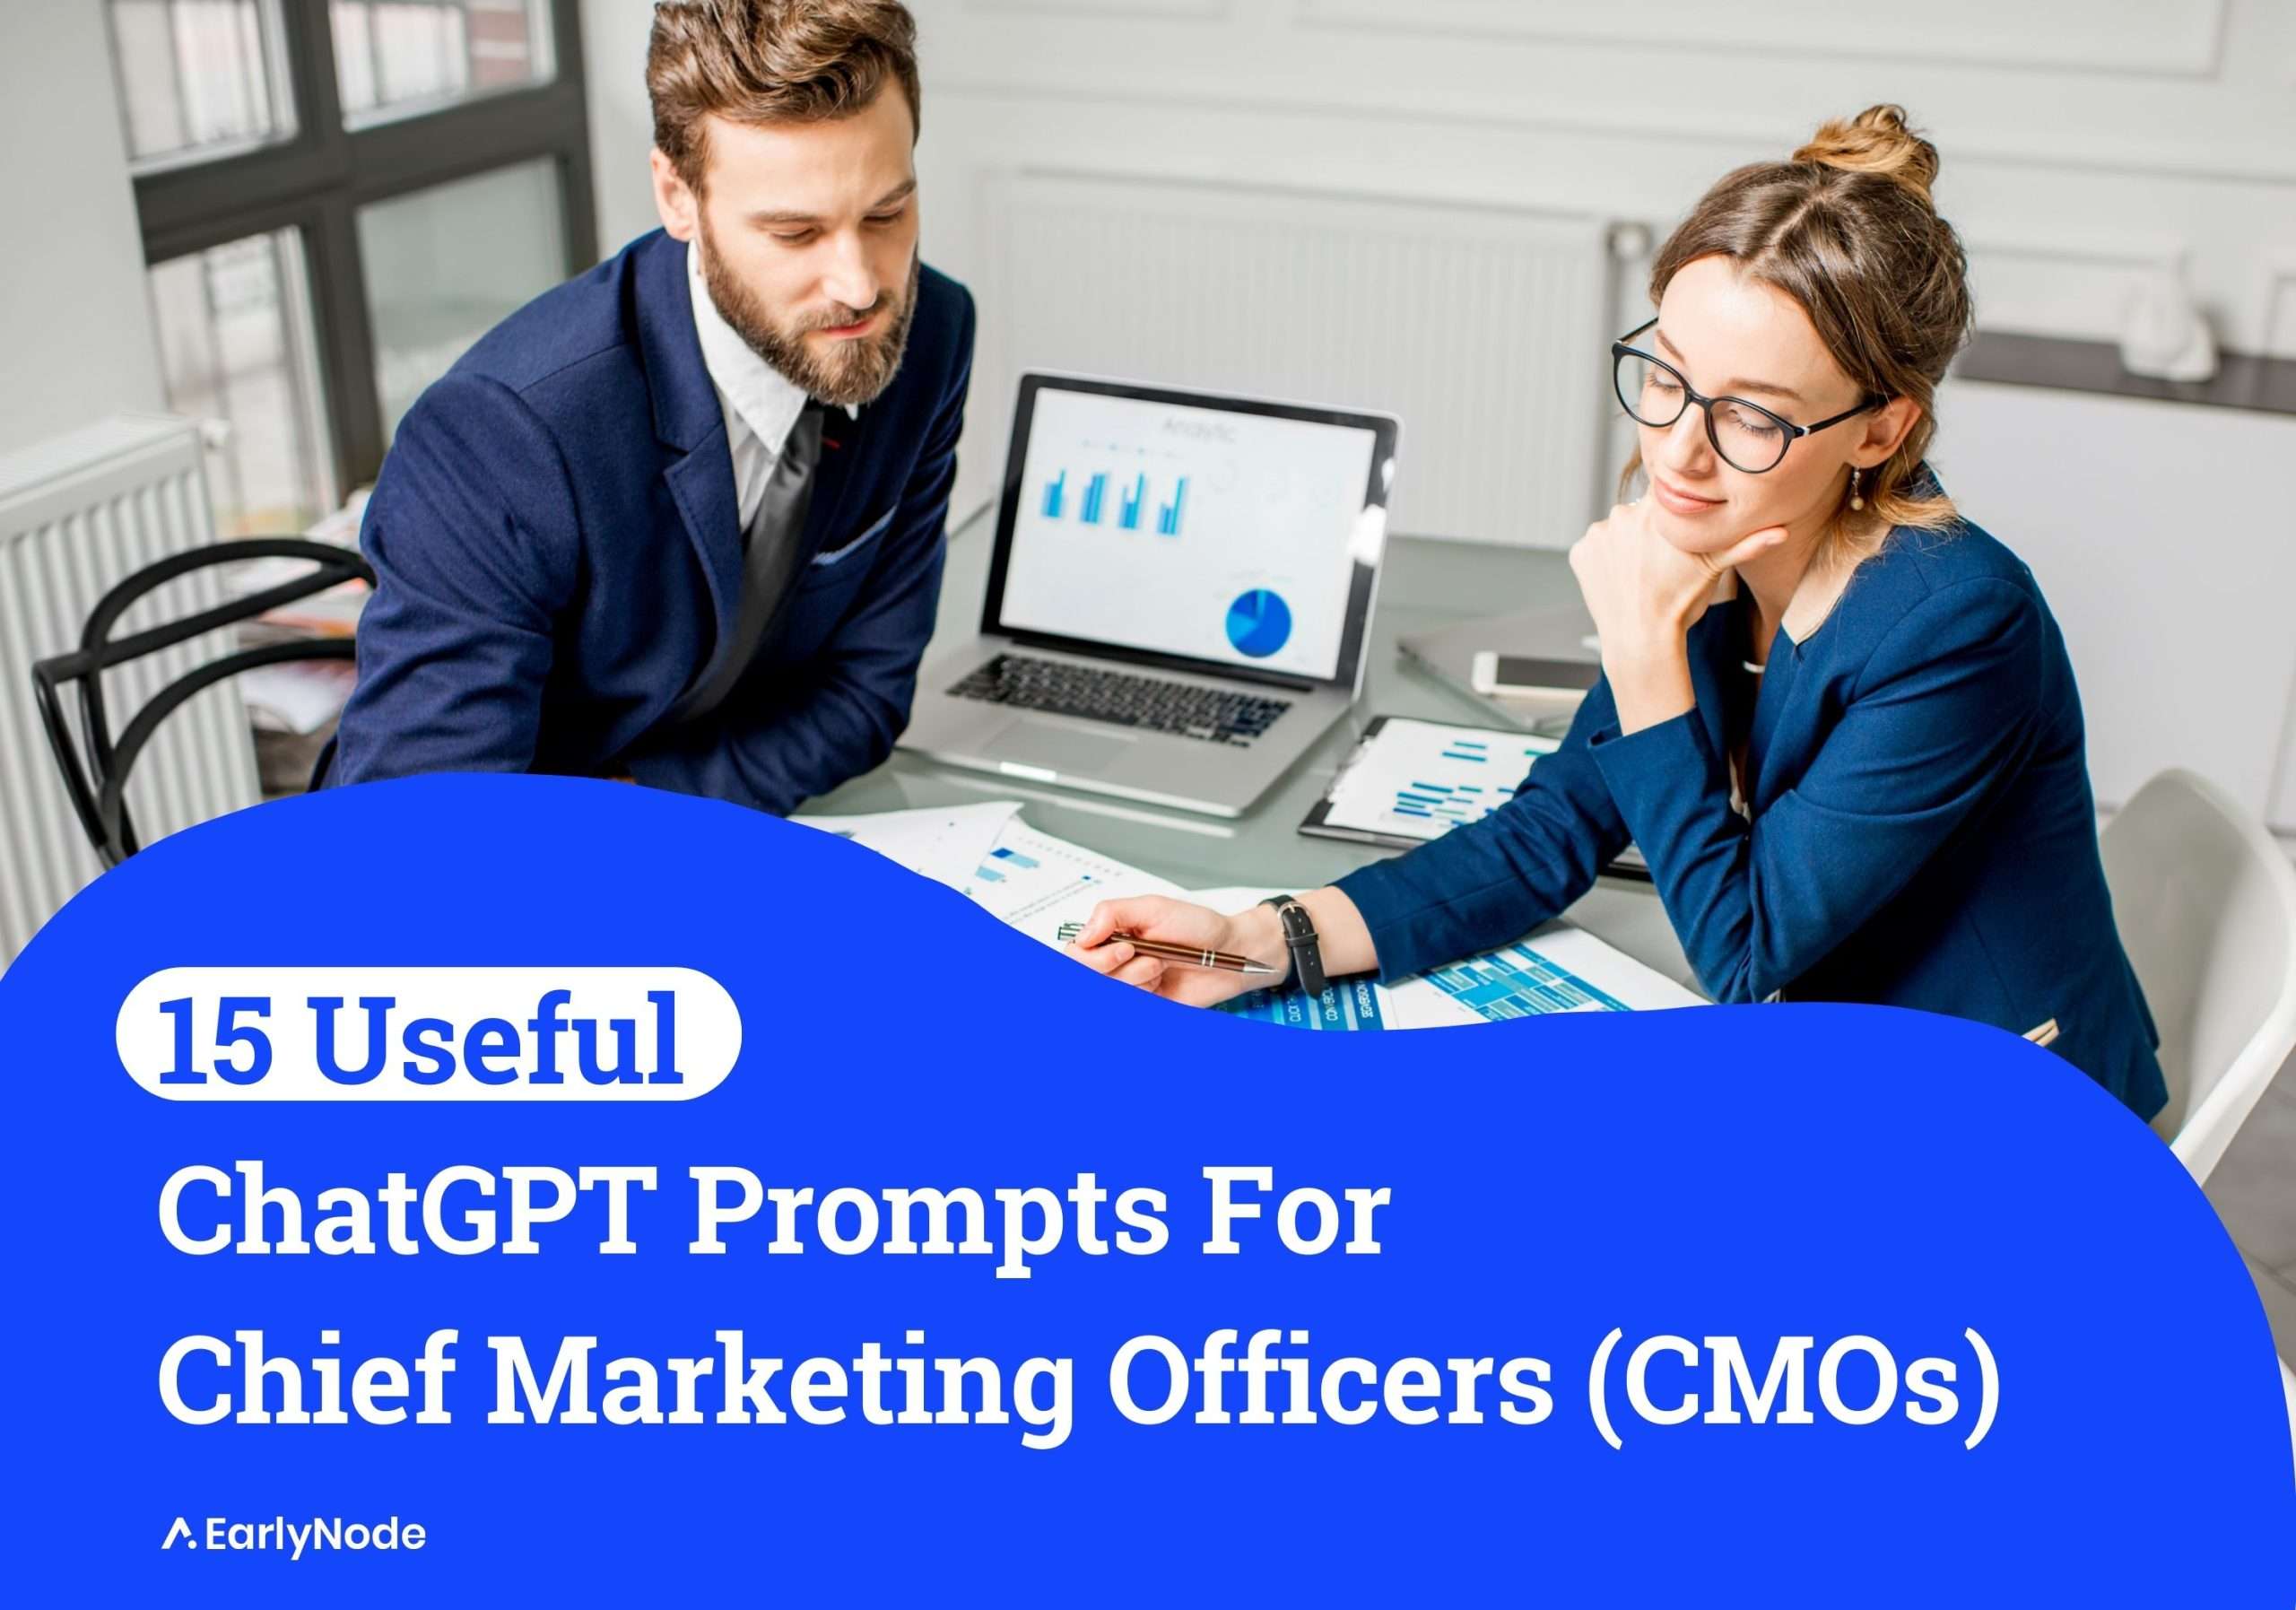 15+ ChatGPT Prompts for Chief Marketing Officers (CMOs)